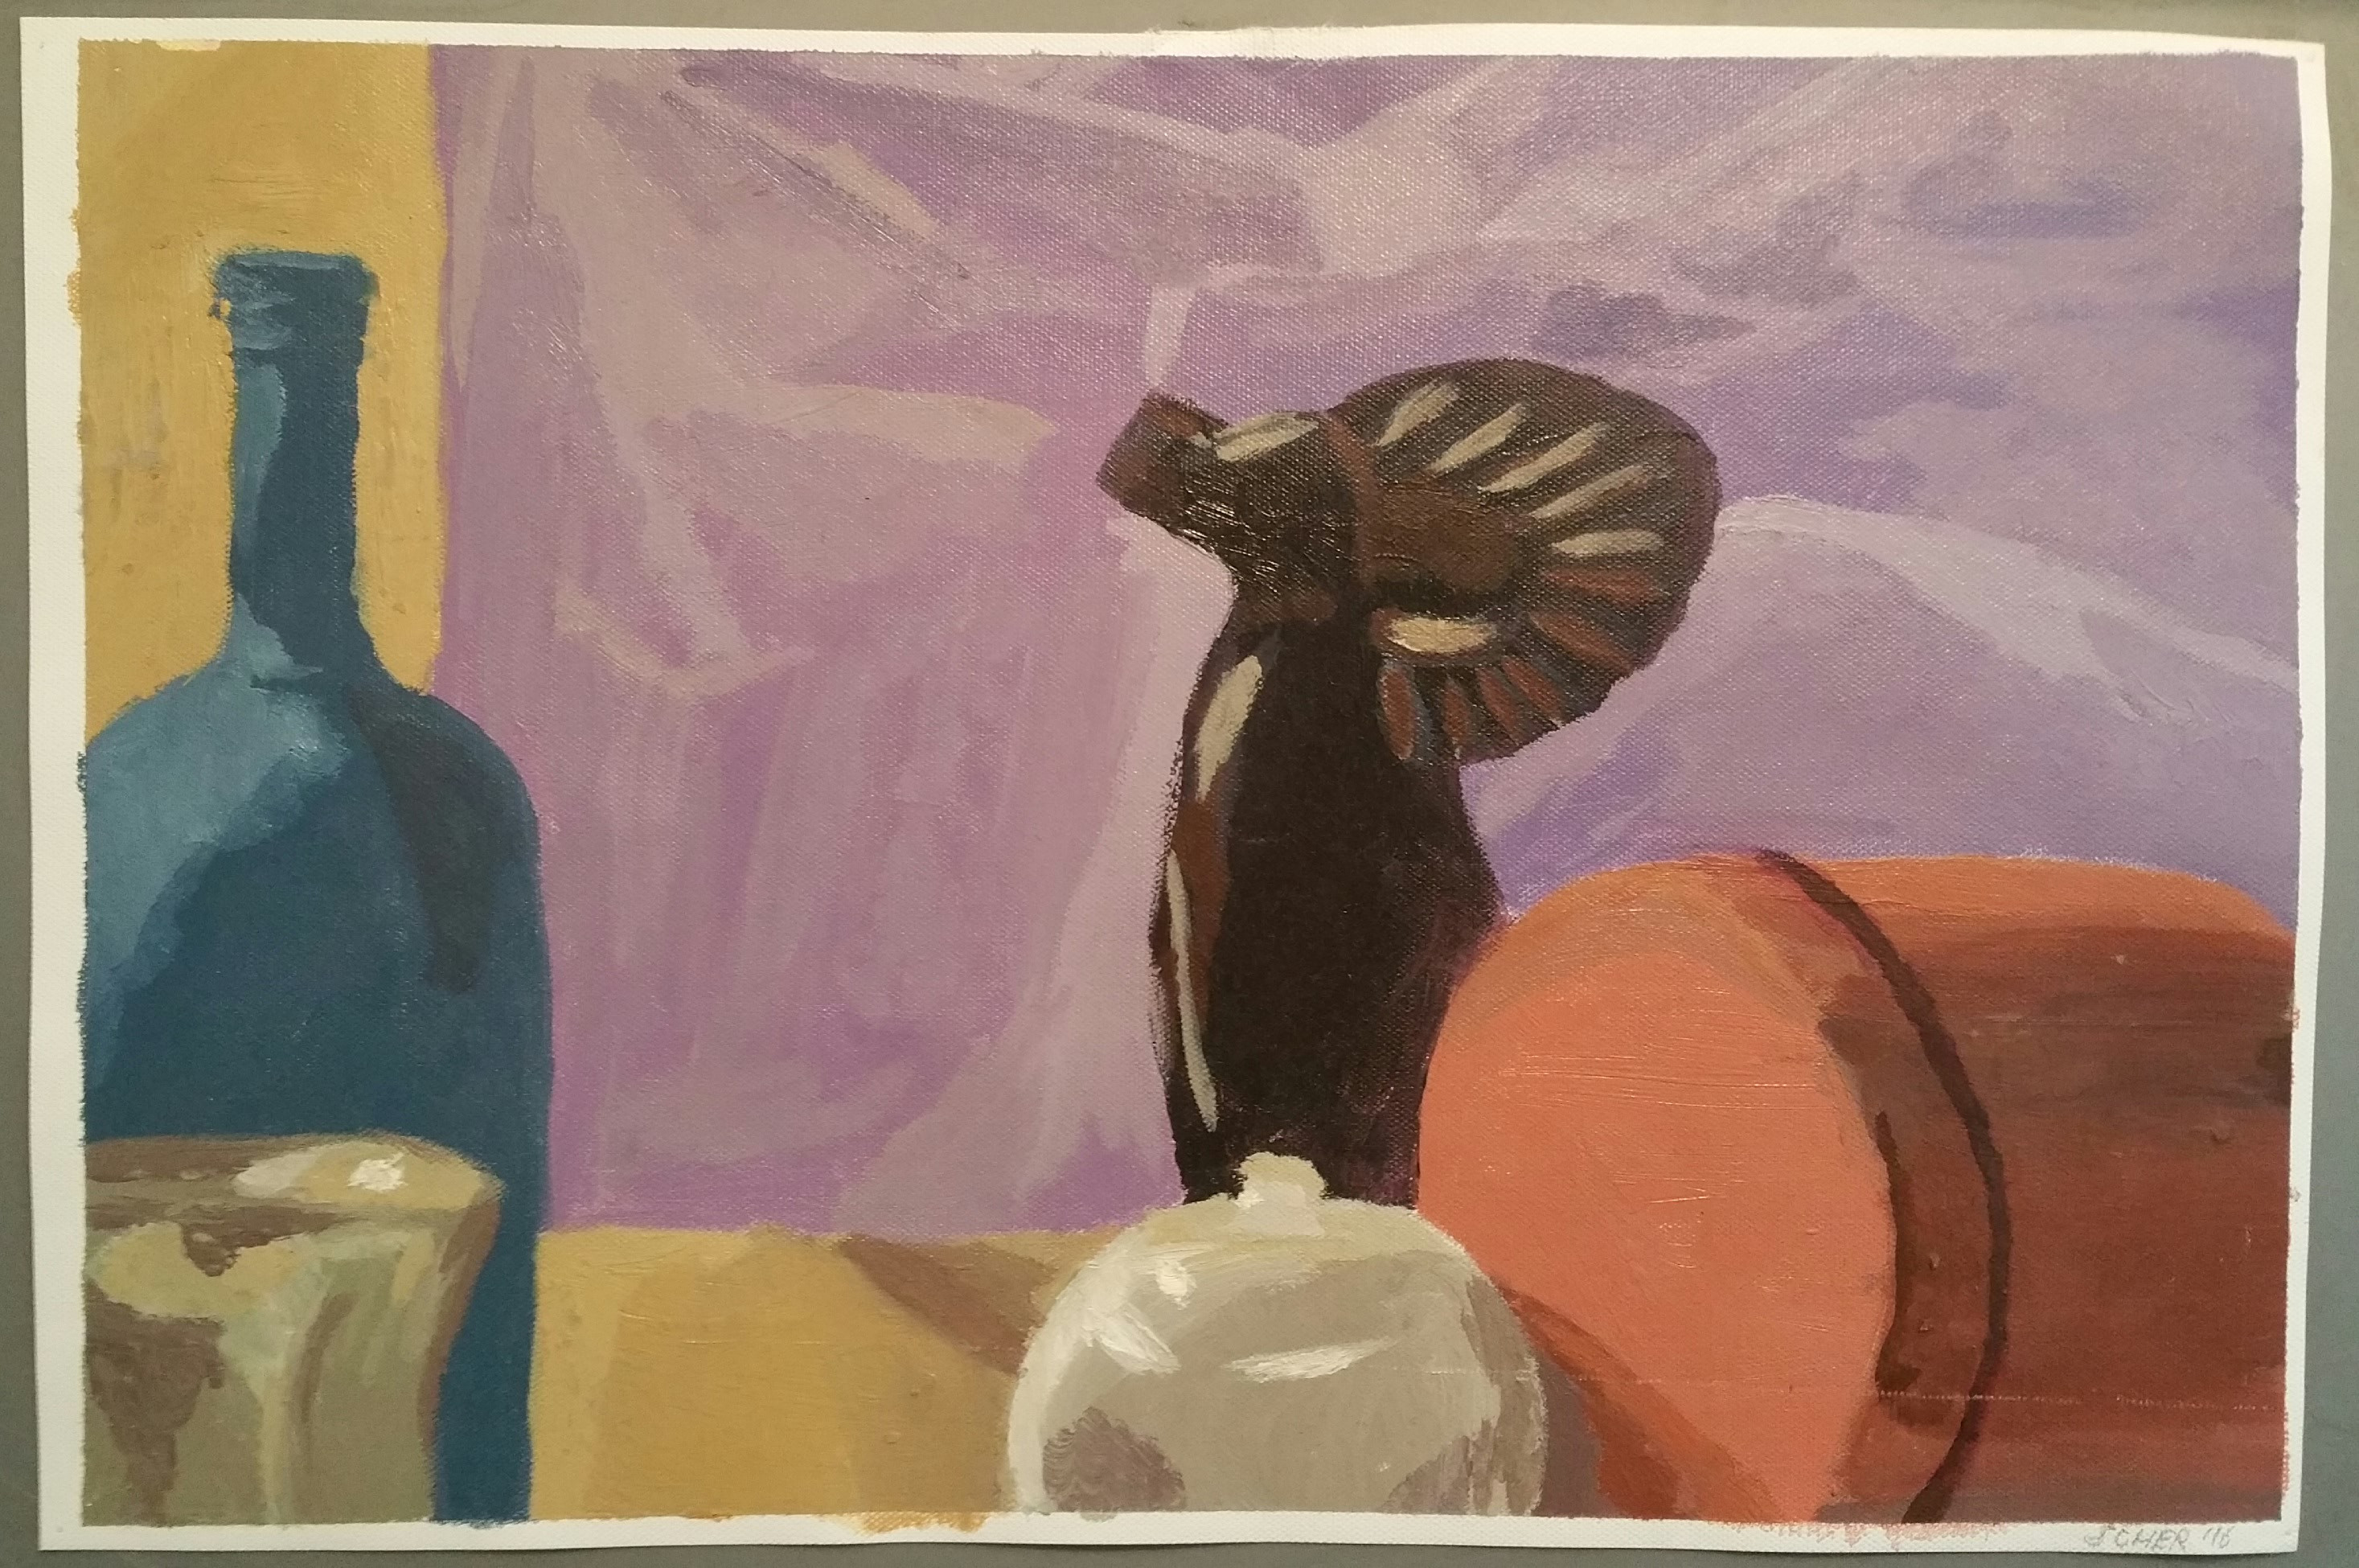 Still Life with Ram, Oil on Canvas, 2016